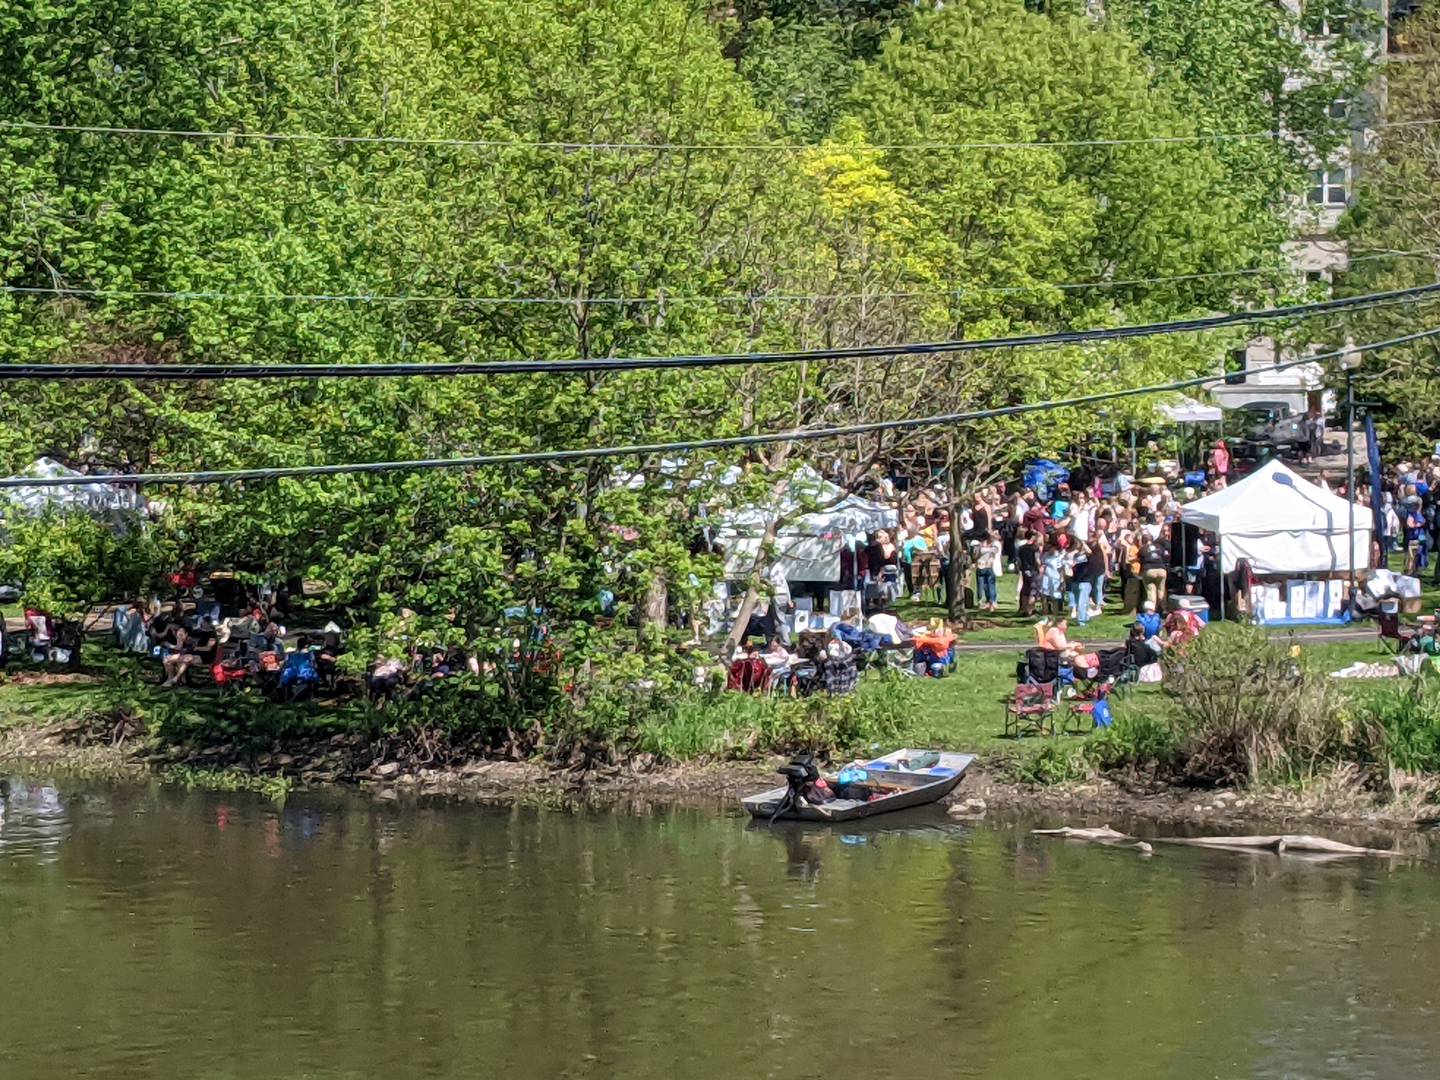 Crowds enjoyed the nice weather May 5 at Oswego's Wine on the Fox festival, held in Hudson Crossing Park along the Fox River.